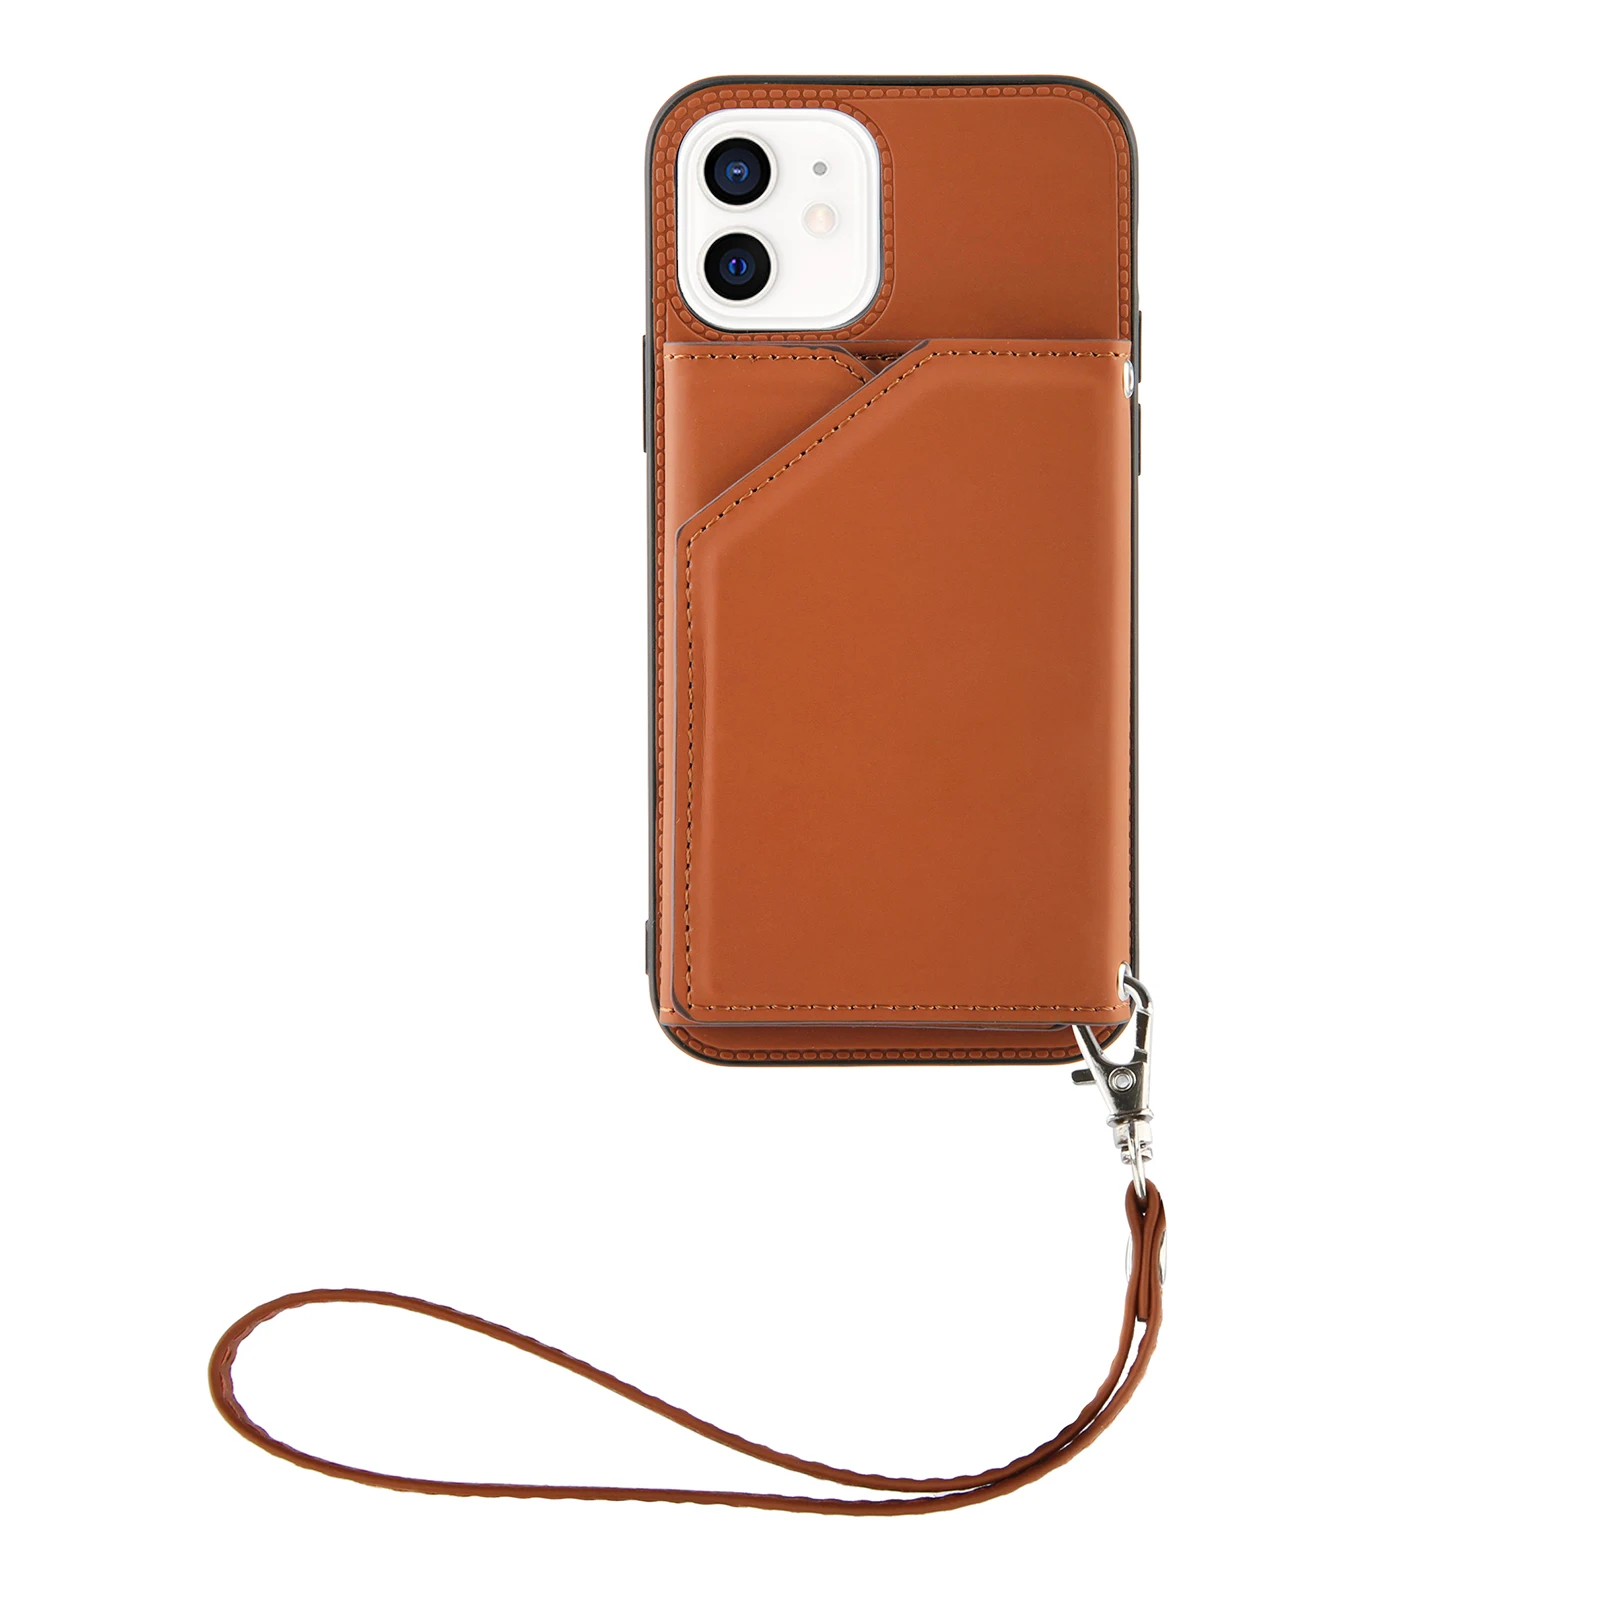 13 pro max case Phone Case with Card Holder for iPhone 13 12 Mini SE2020 11 Pro Max XR XS 7 8Plus TPU Shockproof Back Cover Leather Lanyard Etui case for iphone 13 pro max iPhone 13 Pro Max